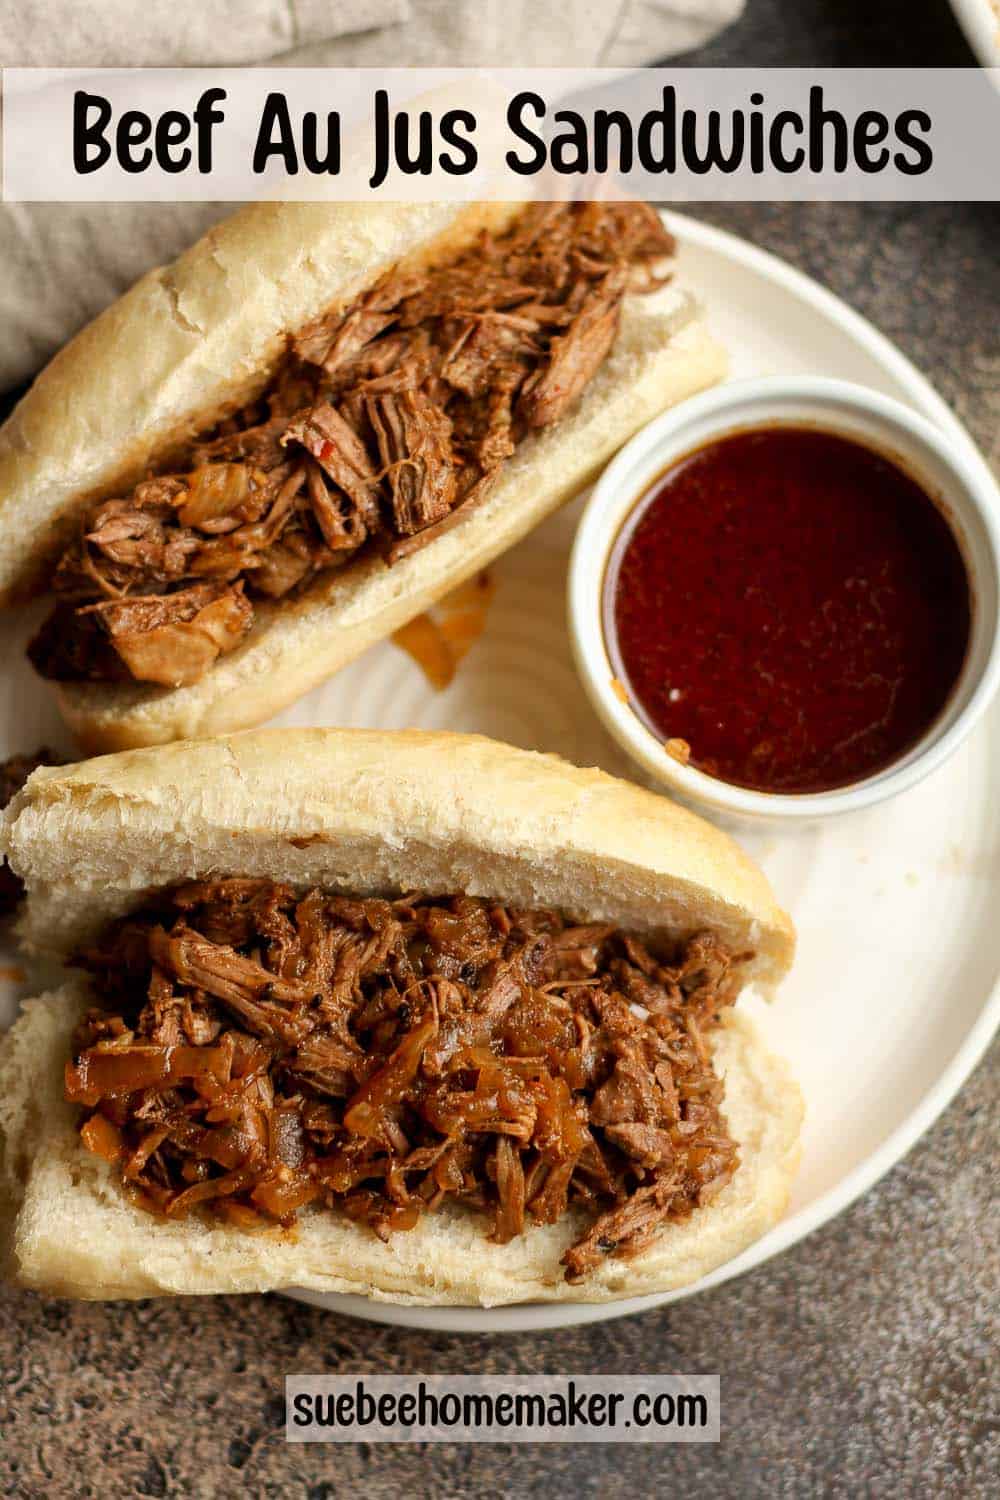 A plate of two beef au jus sandwiches with a side of au jus.